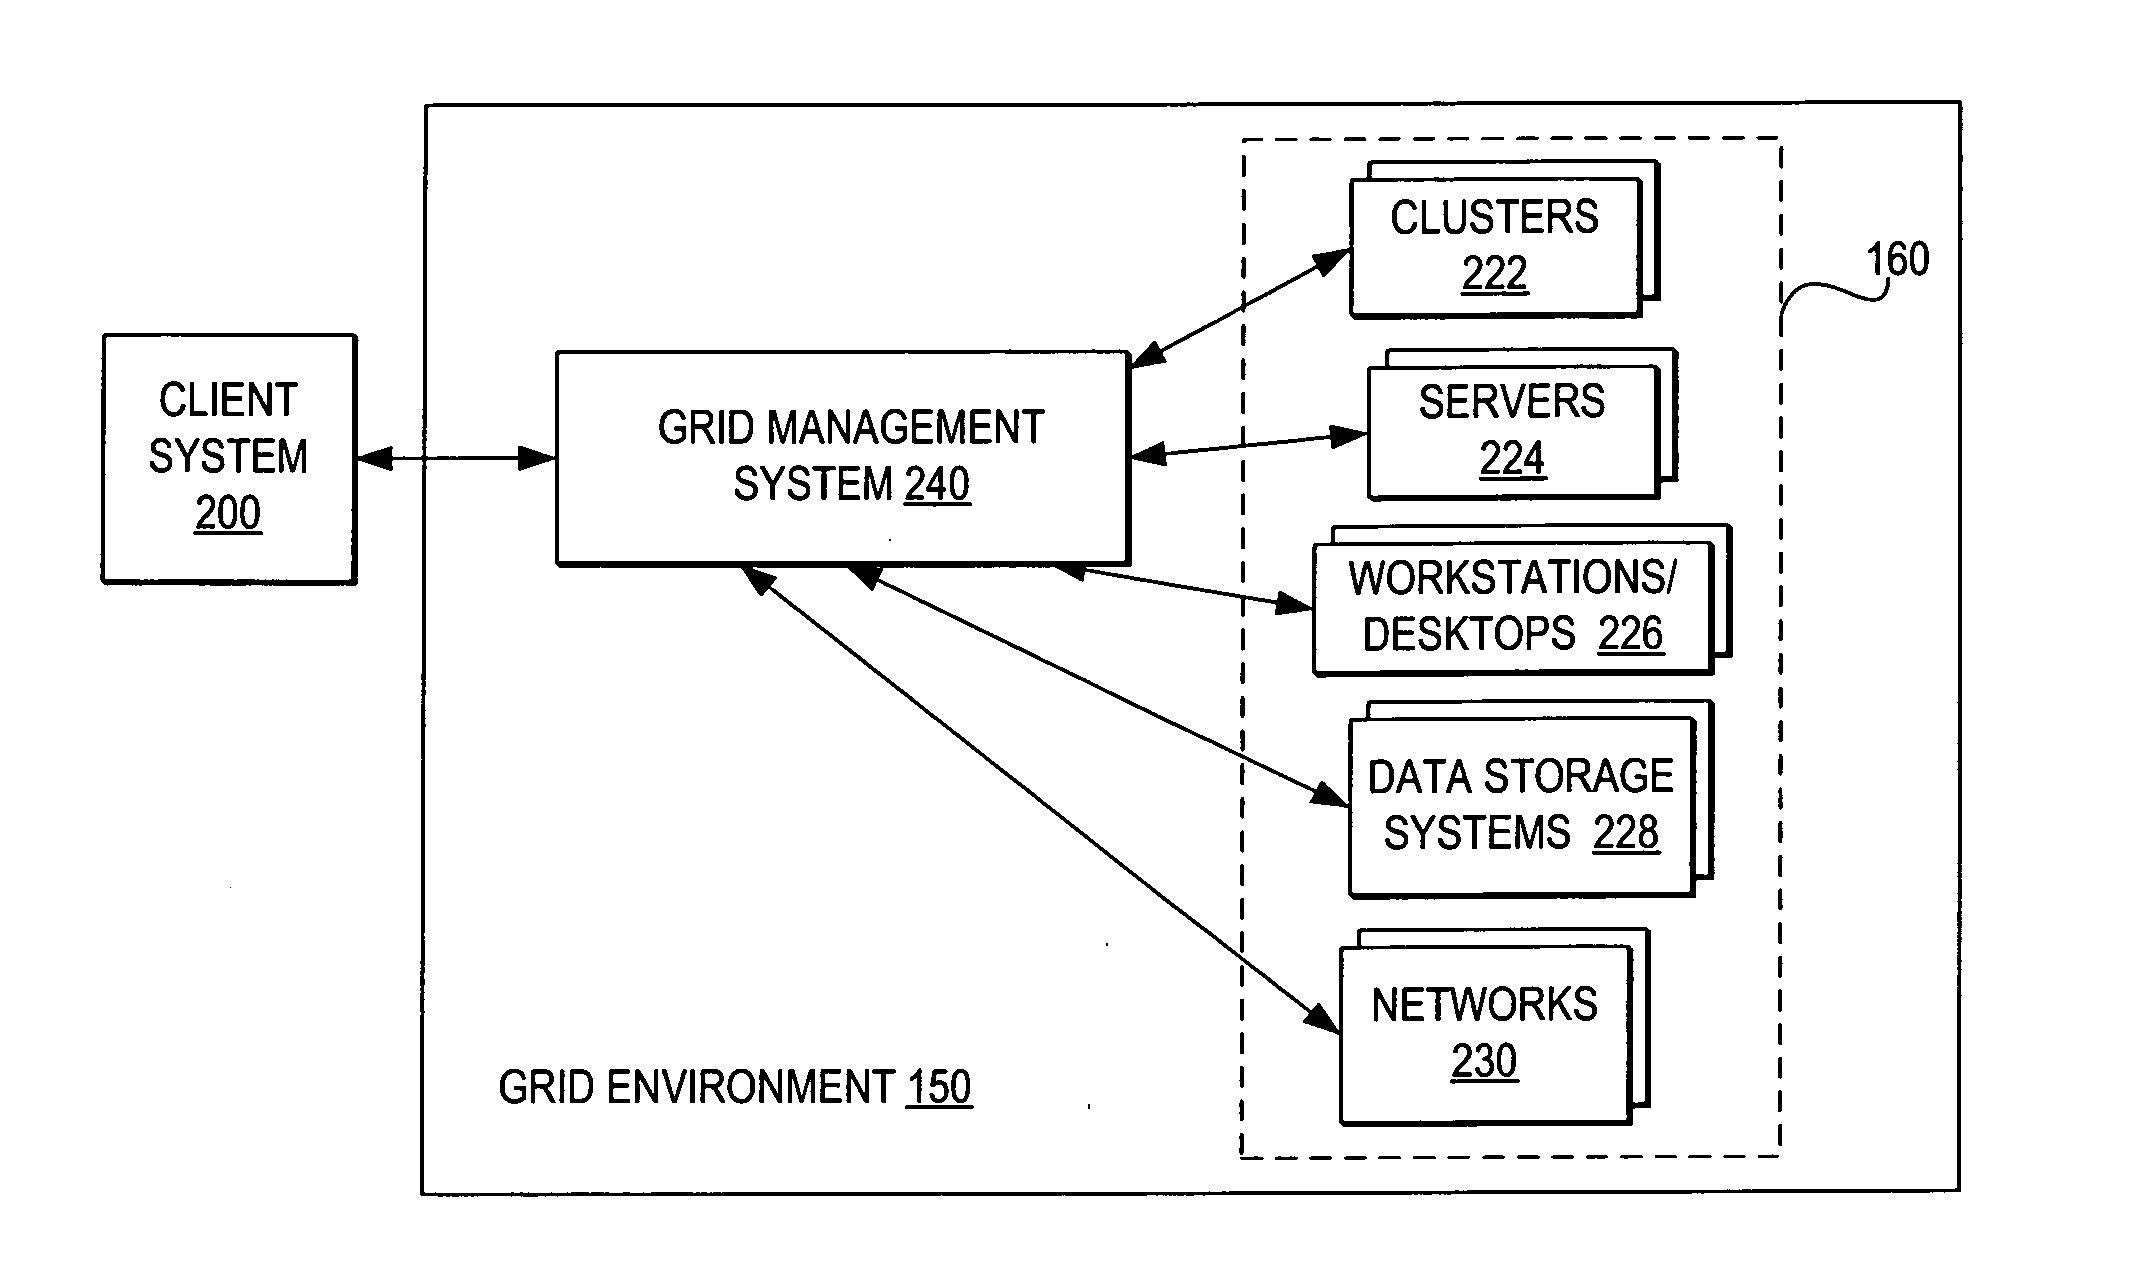 Facilitating overall grid environment management by monitoring and distributing grid activity